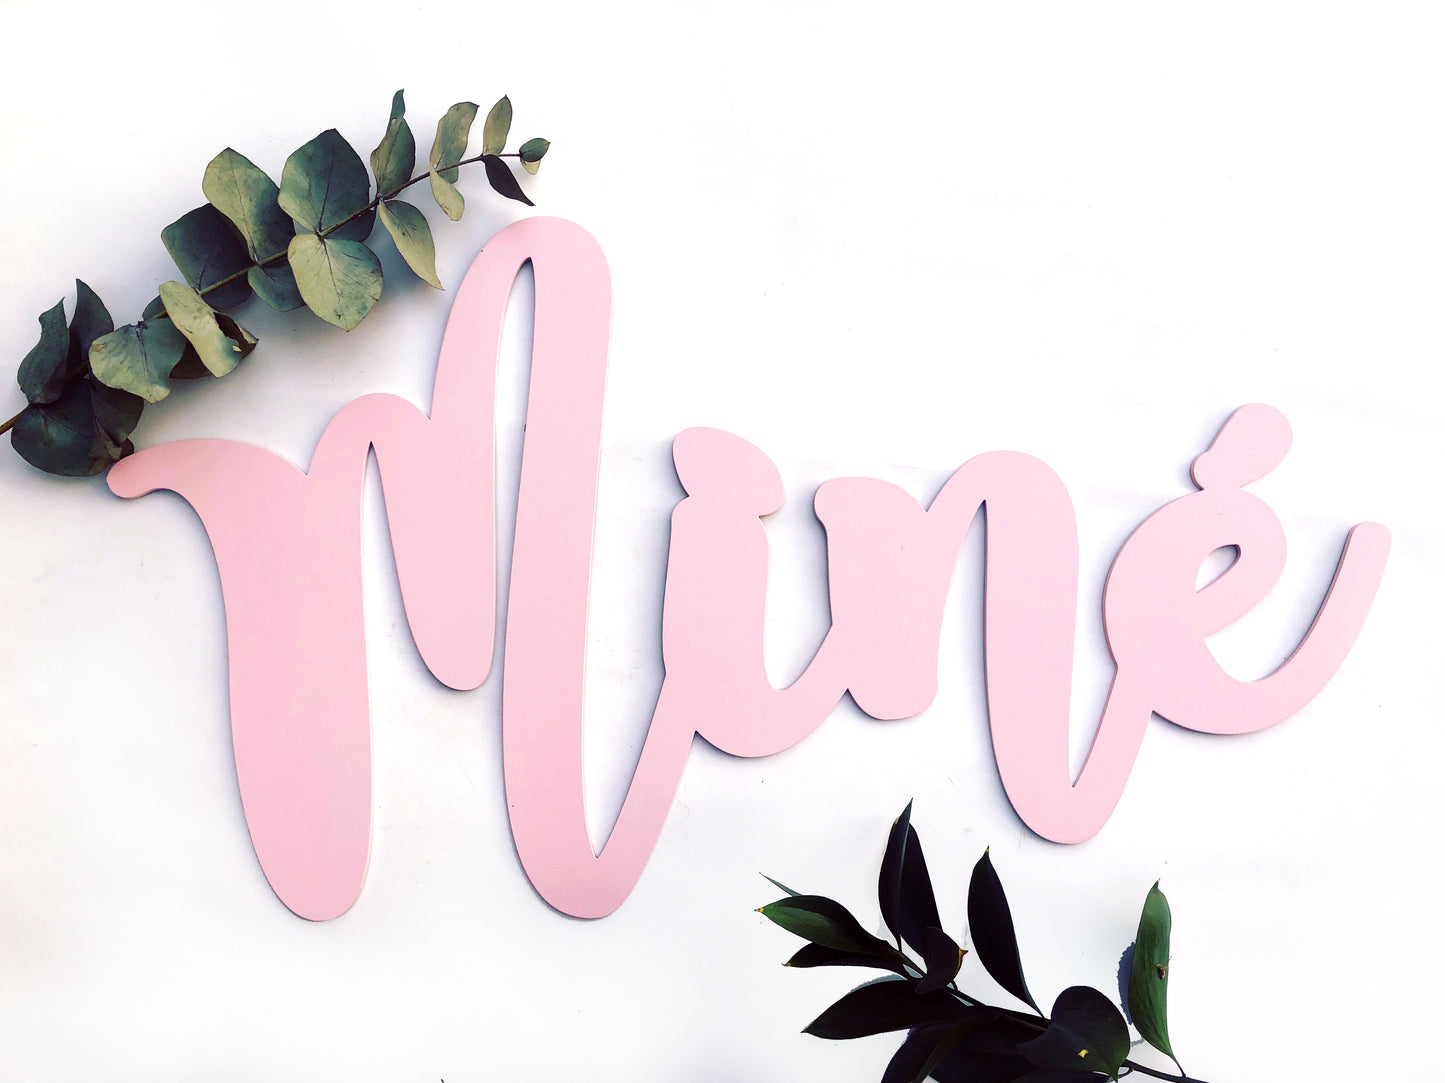 40 - 70cm long Wooden Name - Any colour